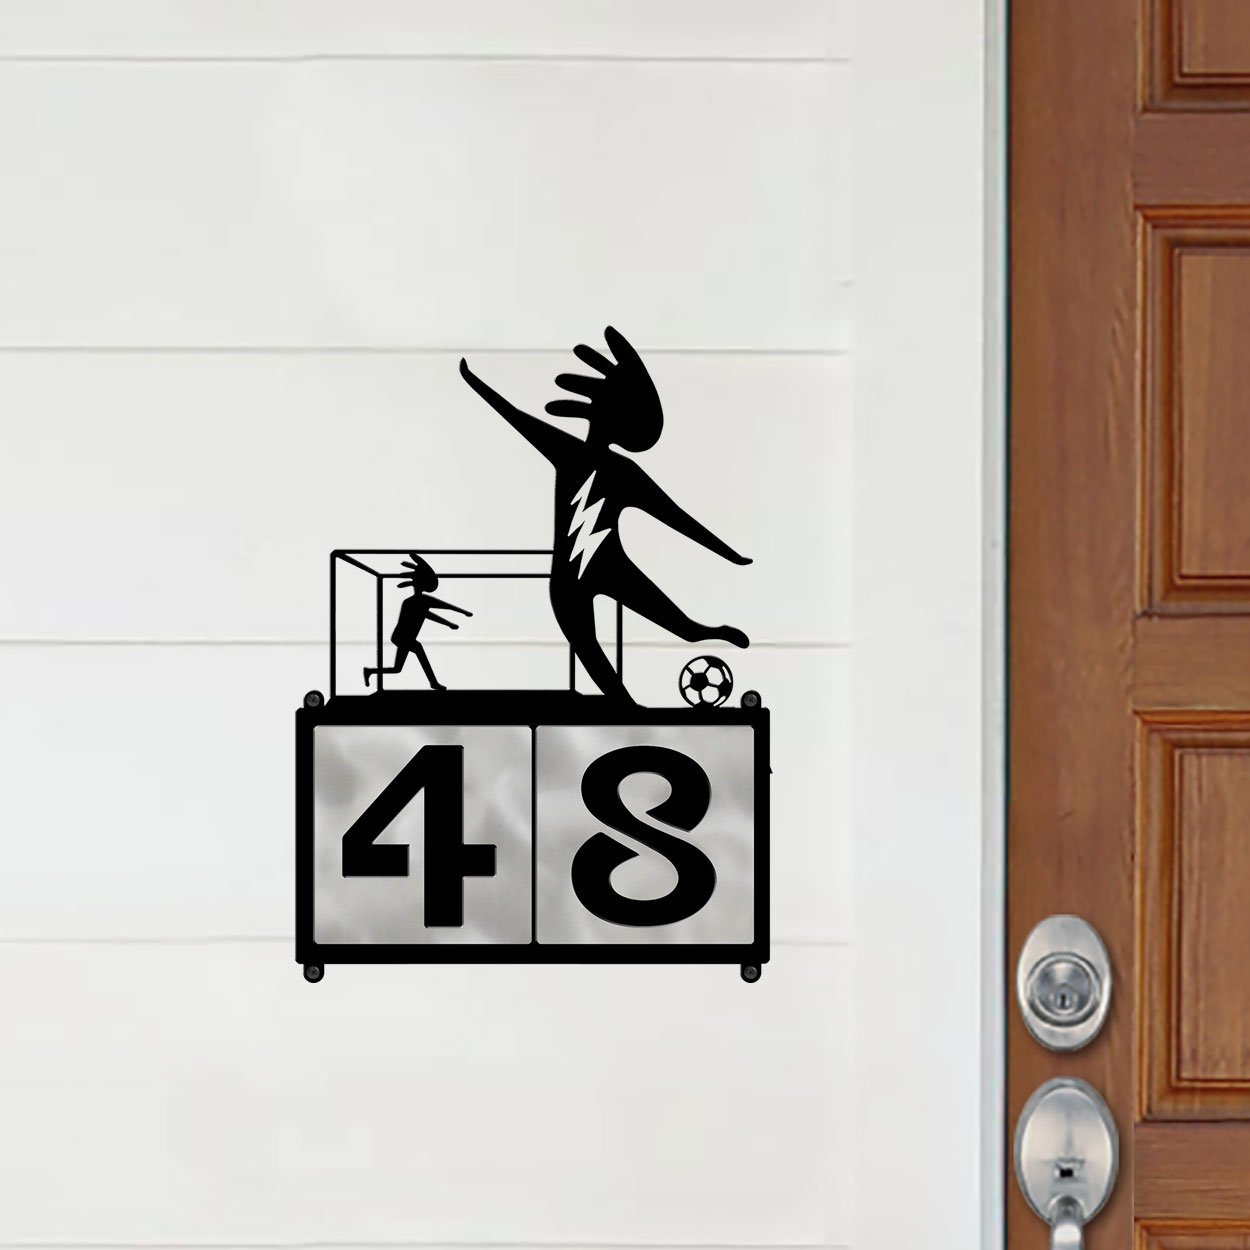 609192 - XL Kokopelli Soccer Player and Goalie Design 2-Digit Horizontal 6in Tile Outdoor House Numbers